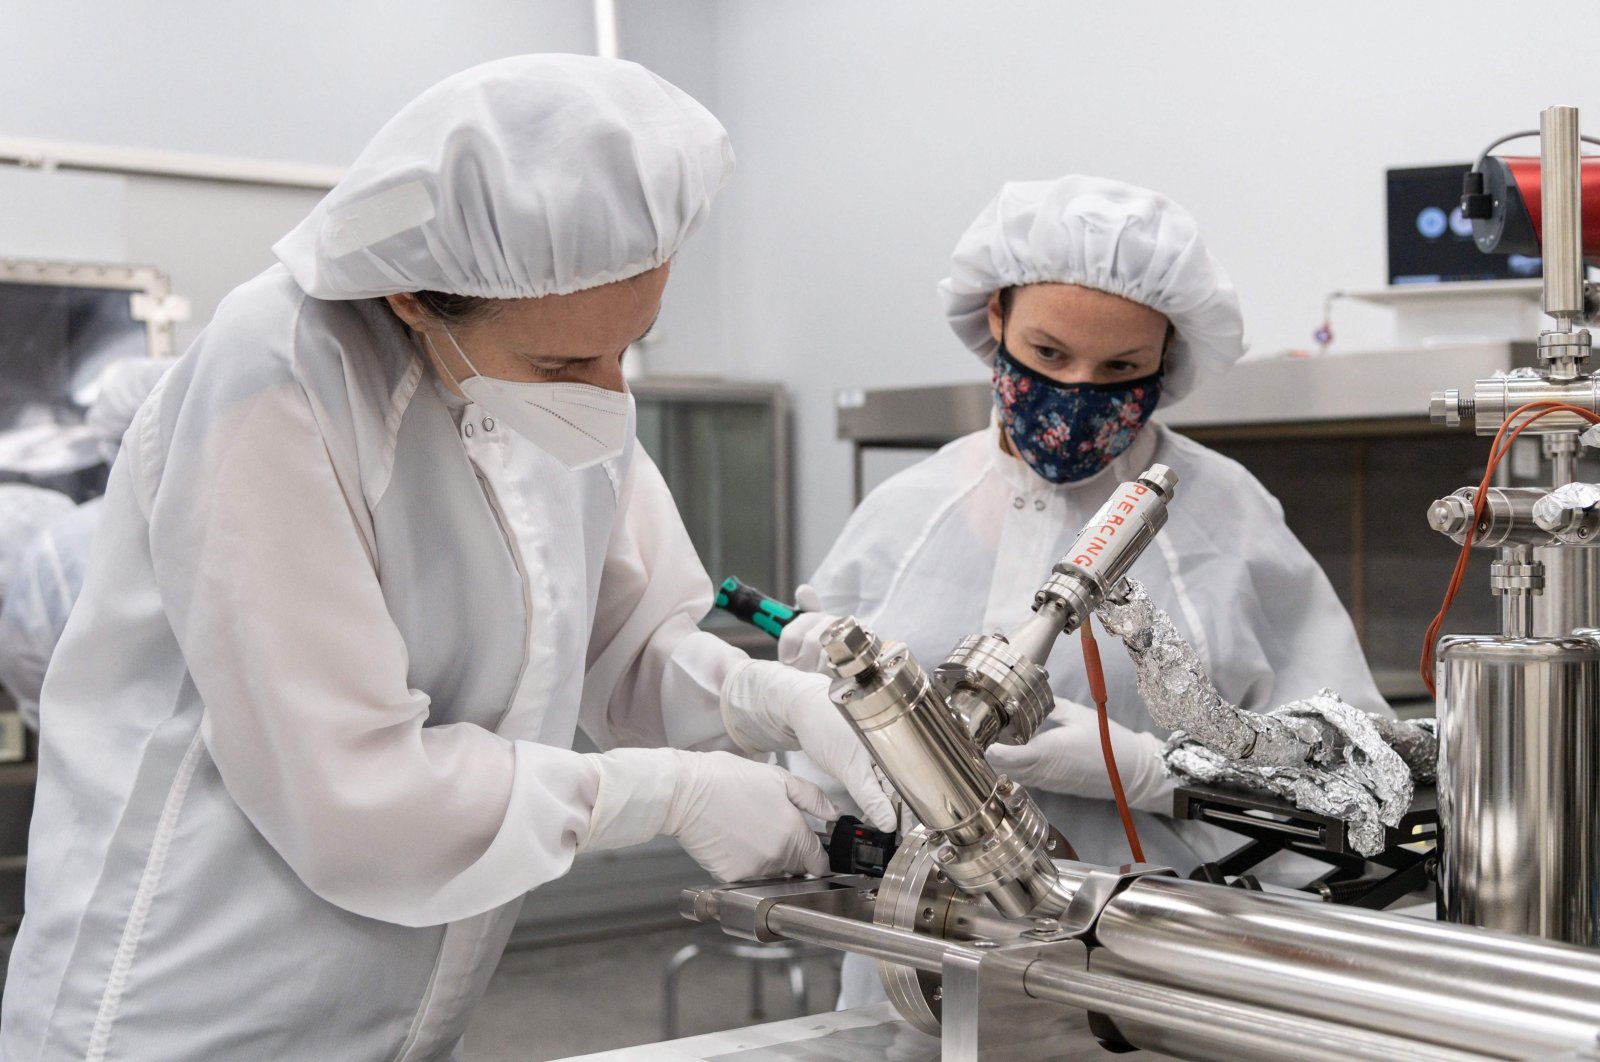 Juliane Gross (L) and Francesca McDonald, take precise measurements from a piercing device, at NASA&#039;s Johnson Space Center in Houston, Texas, U.S., Feb. 23, 2022. (NASA via AFP)